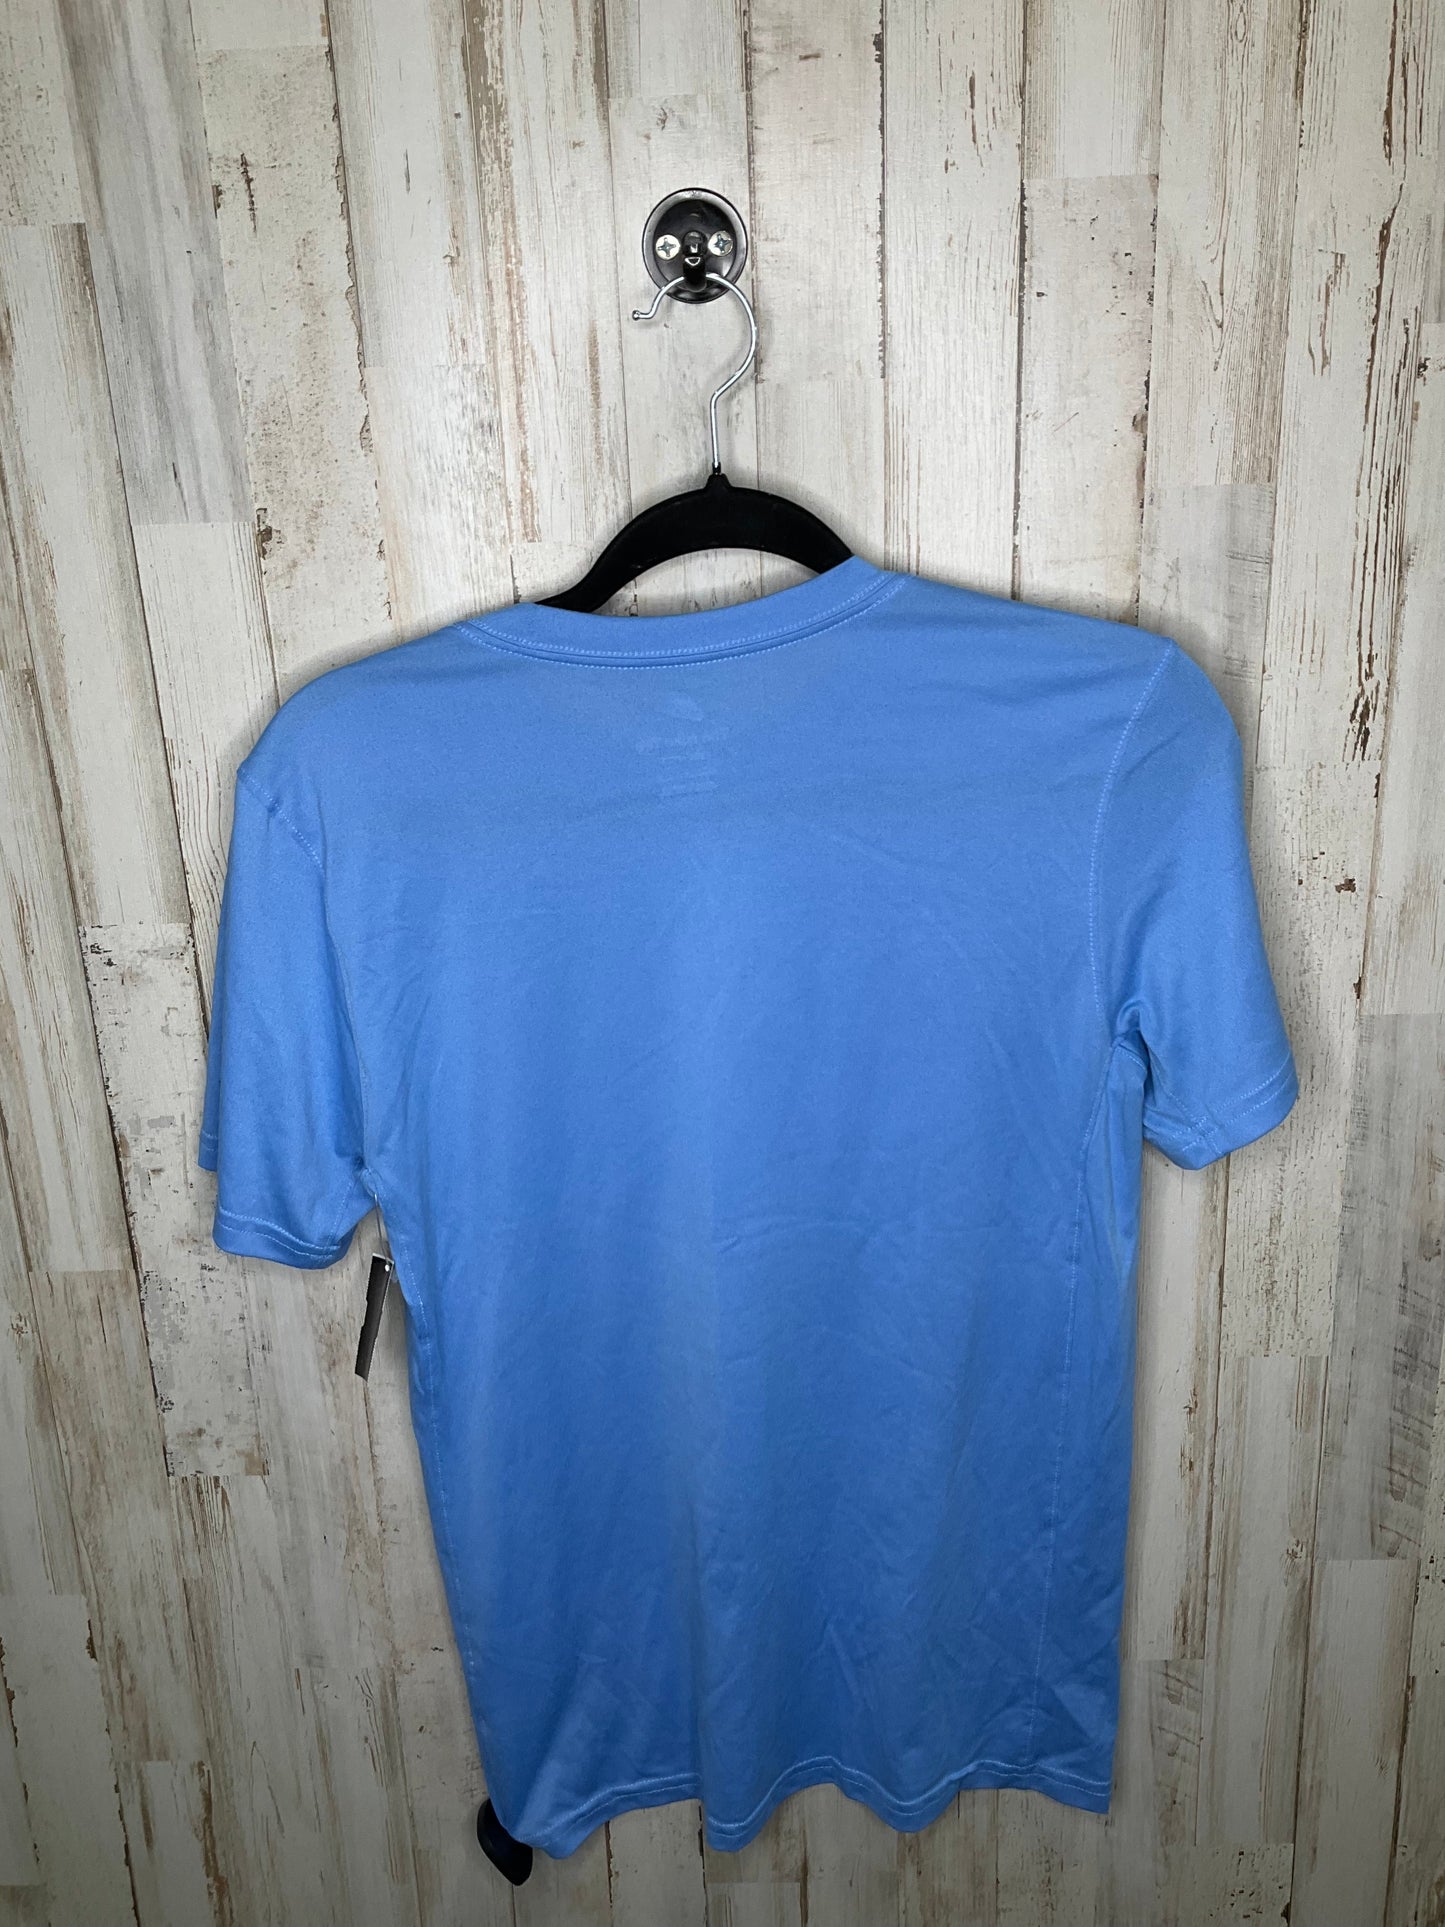 Blue Athletic Top Short Sleeve Nike, Size S